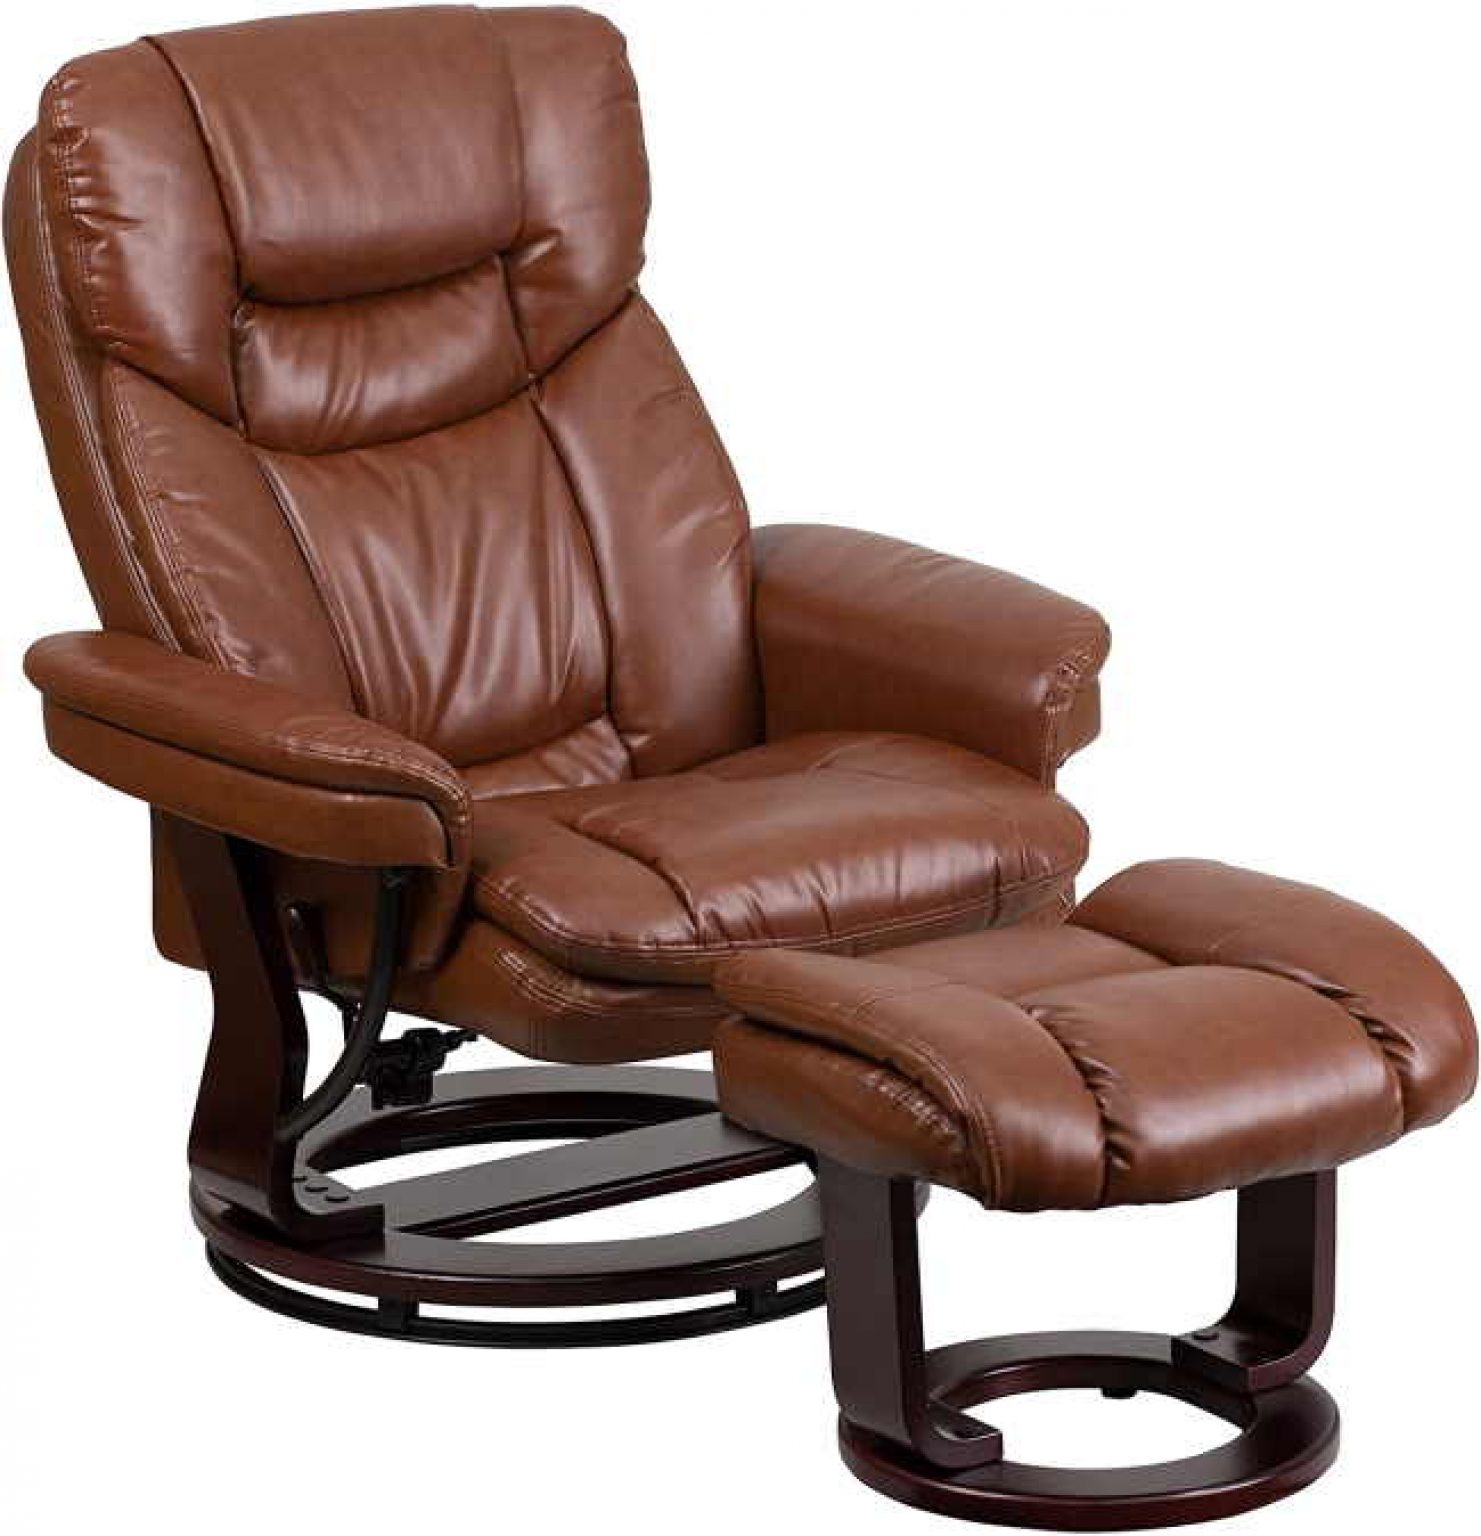 Leather Recliner 1481x1536 